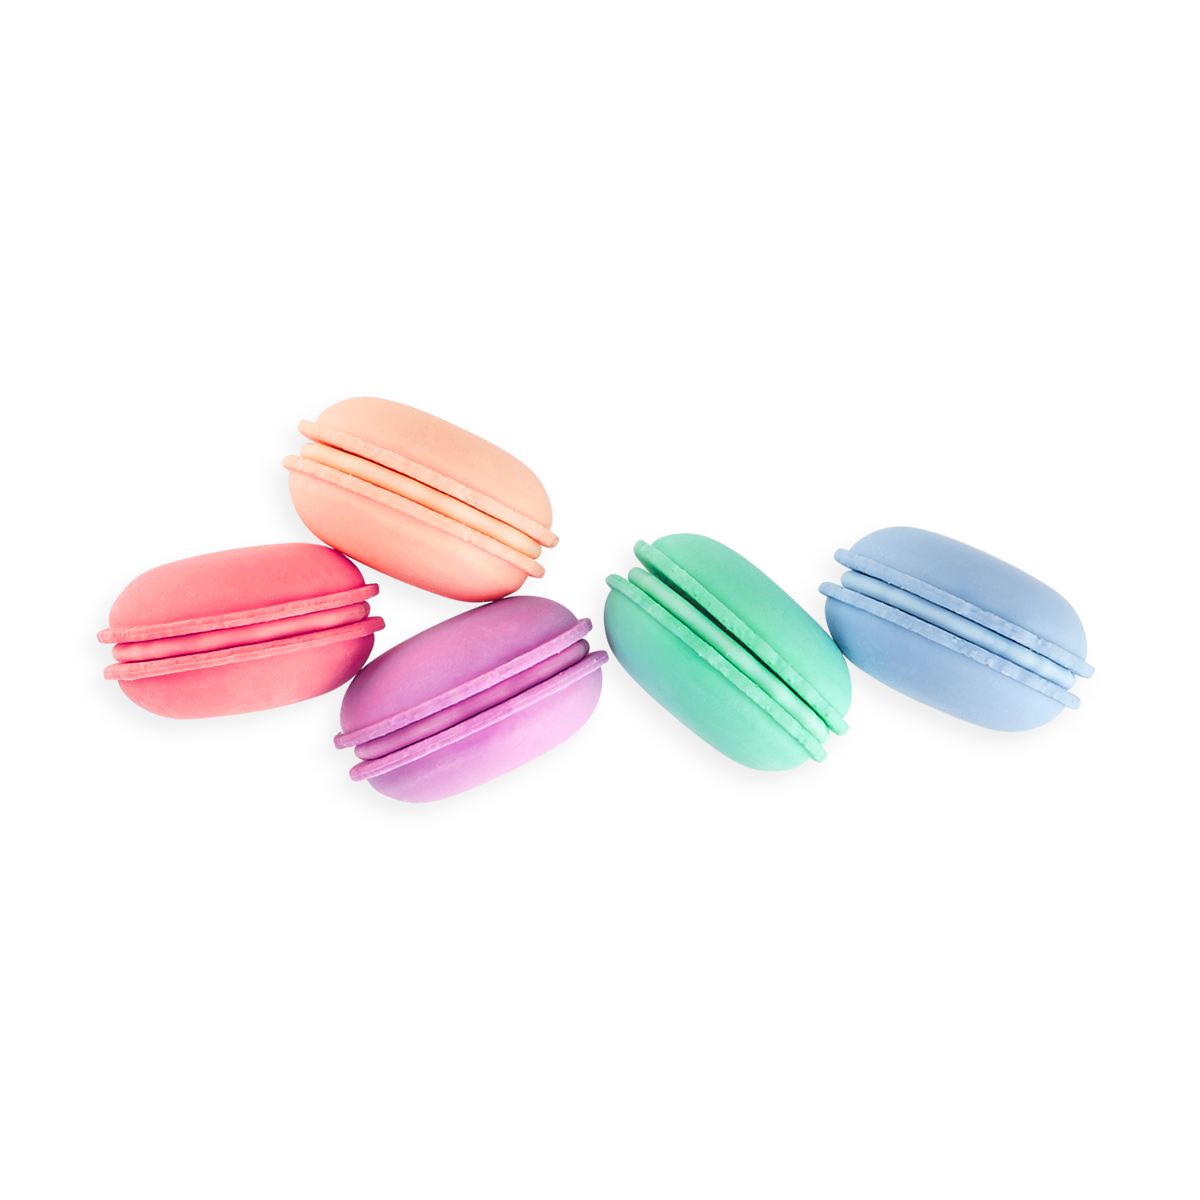 Side view of Le Macaron Patisserie Scented Erasers on top of eachother